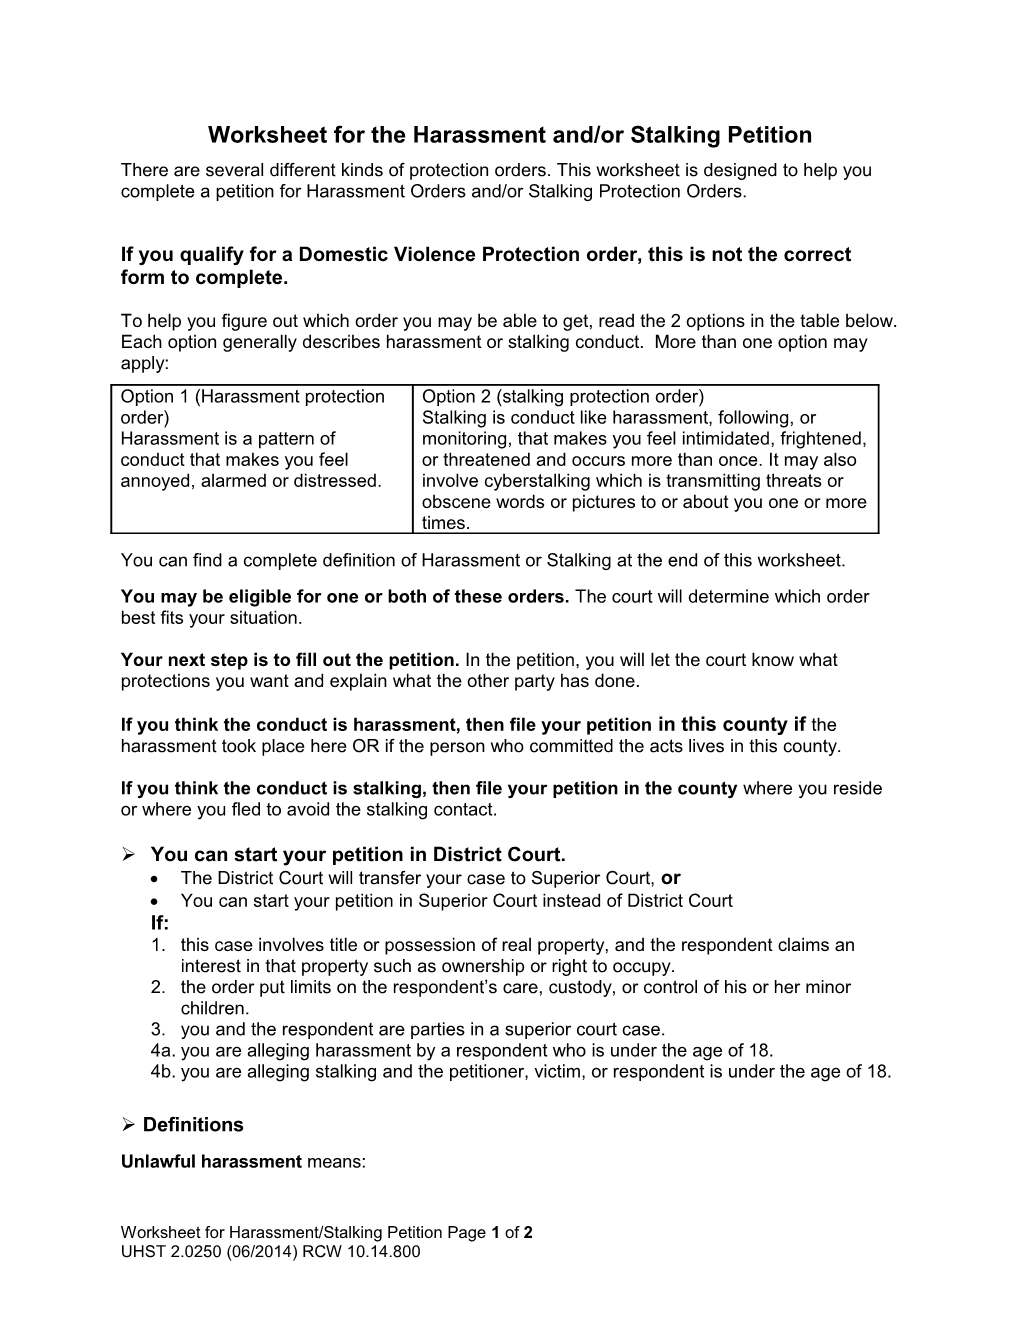 Worksheet for the Harassment And/Or Stalking Petition